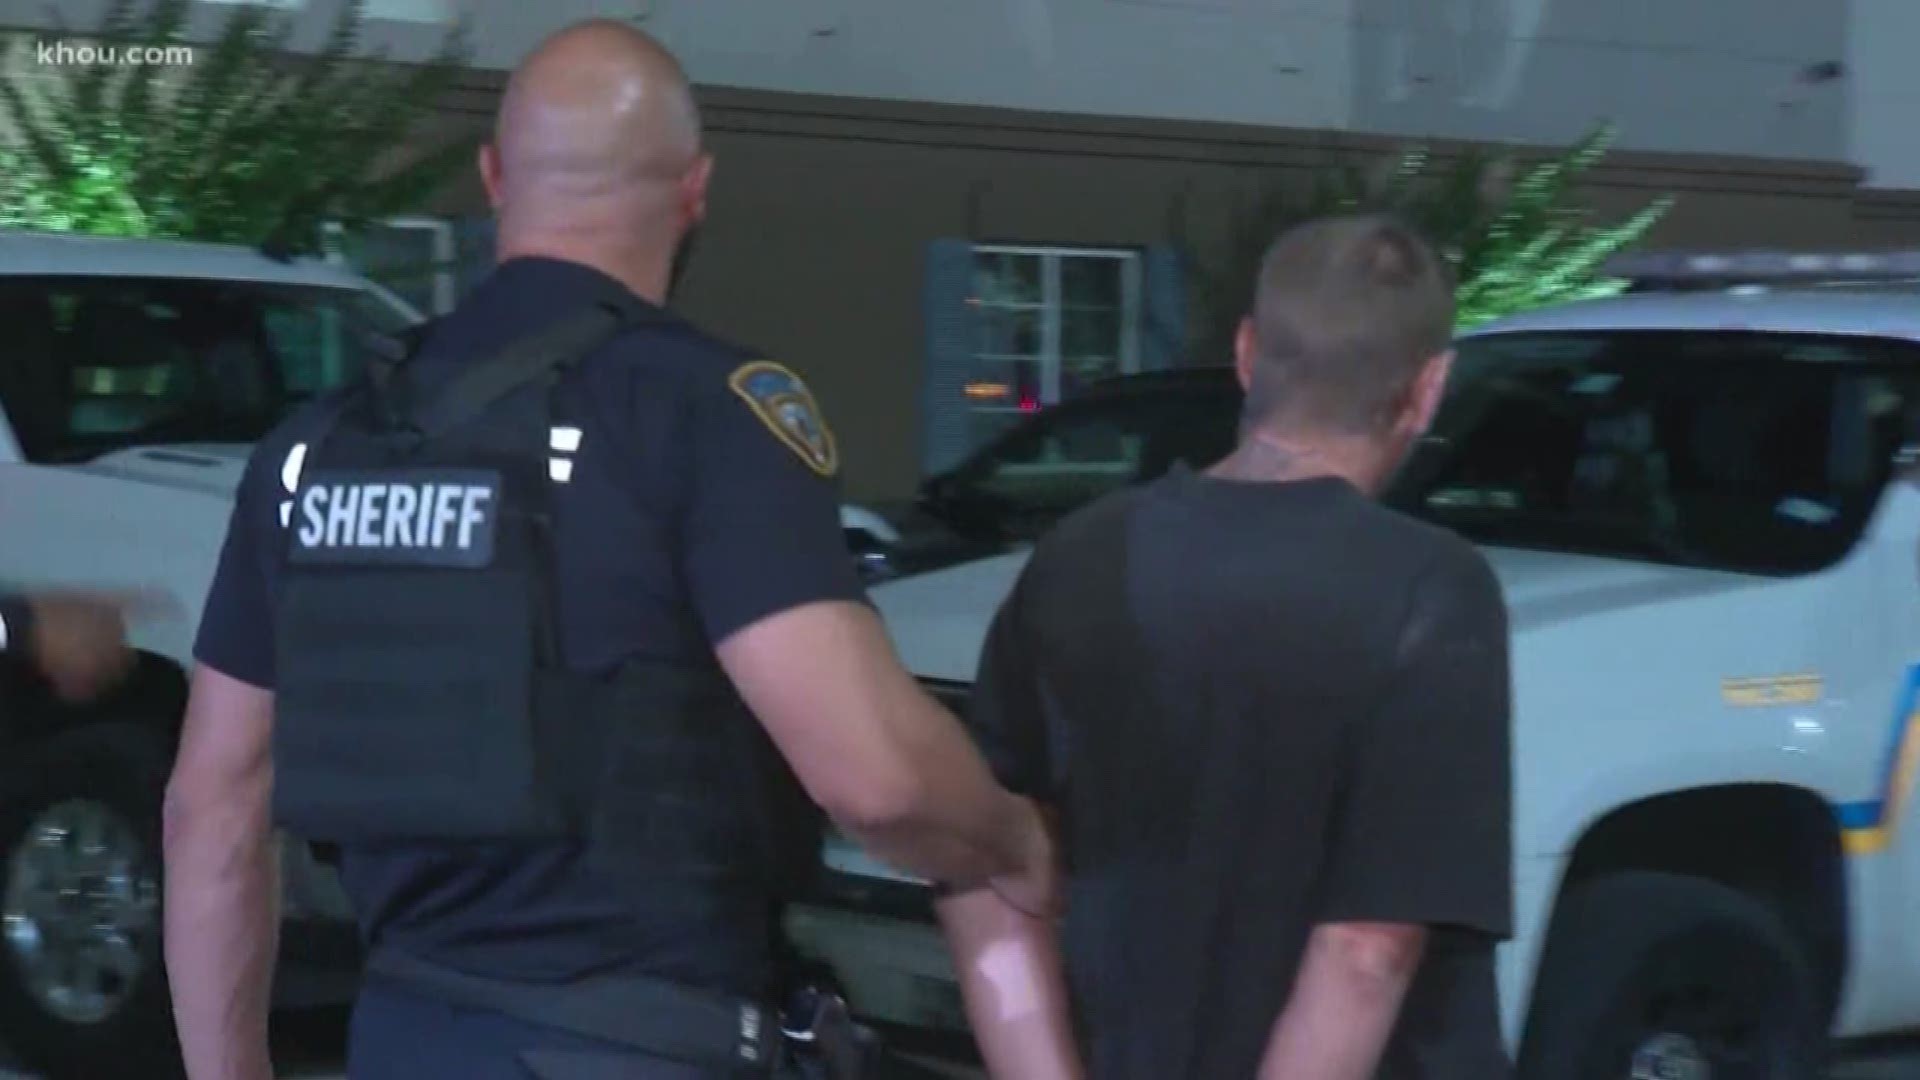 KHOU 11's Janel Forte reports on a hazardous drug bust for deputies at a hotel along the North Sam Houston Tollway.